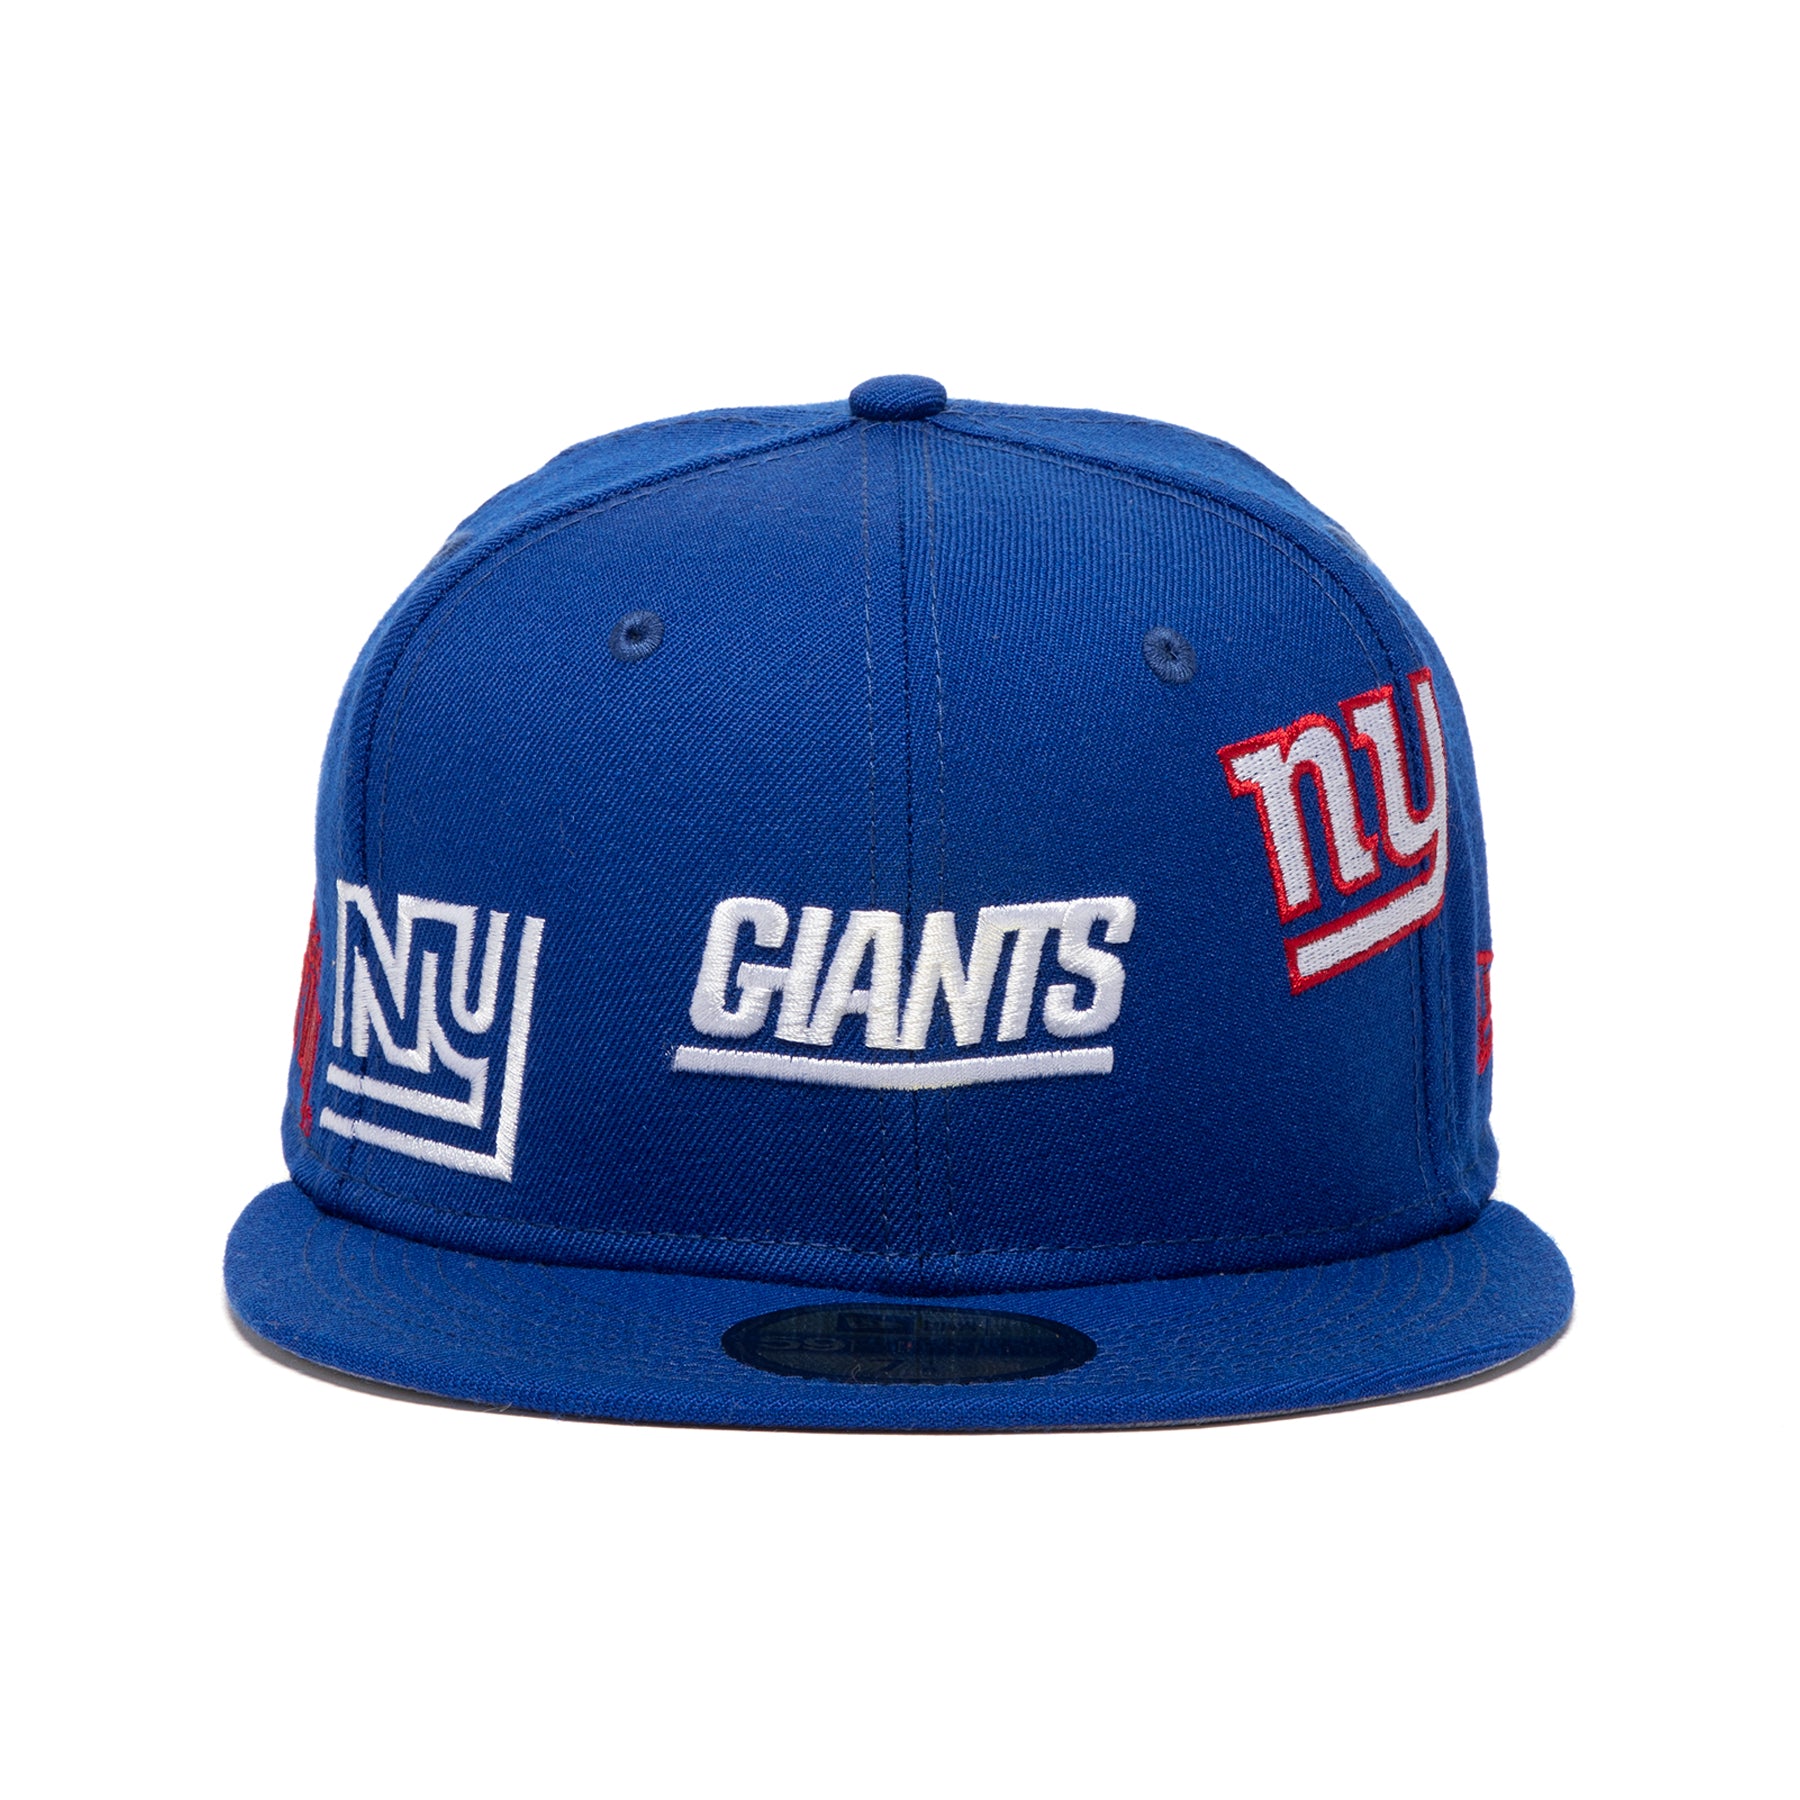 Shop New York Giants Snapback Hats & Fitted NFL Caps